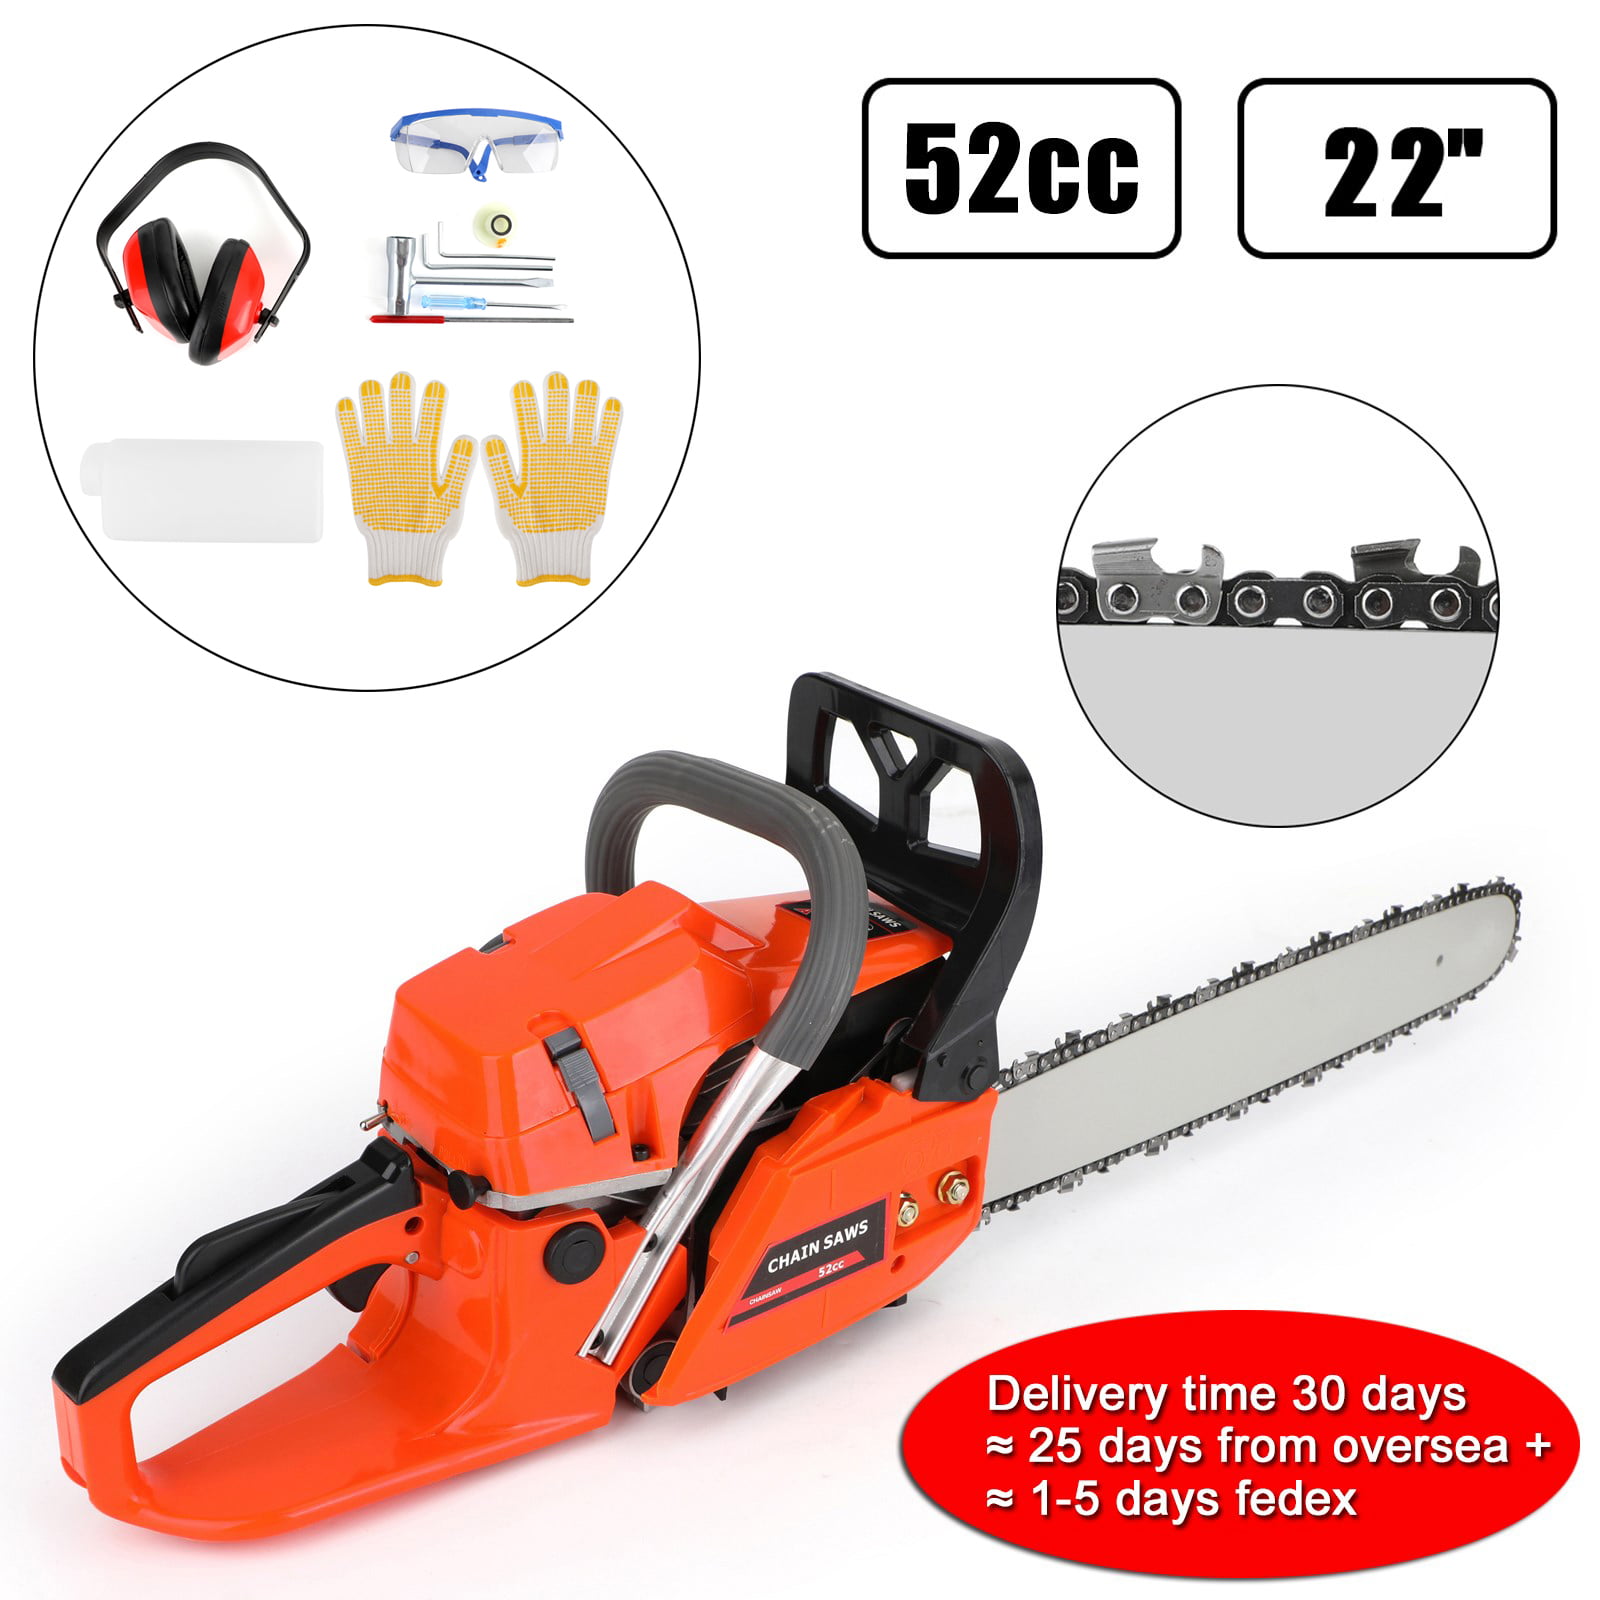 62cc Chainsaw 22 Inch Bar Powered Engine 2 Cycle Gasoline Chain Saw Red 